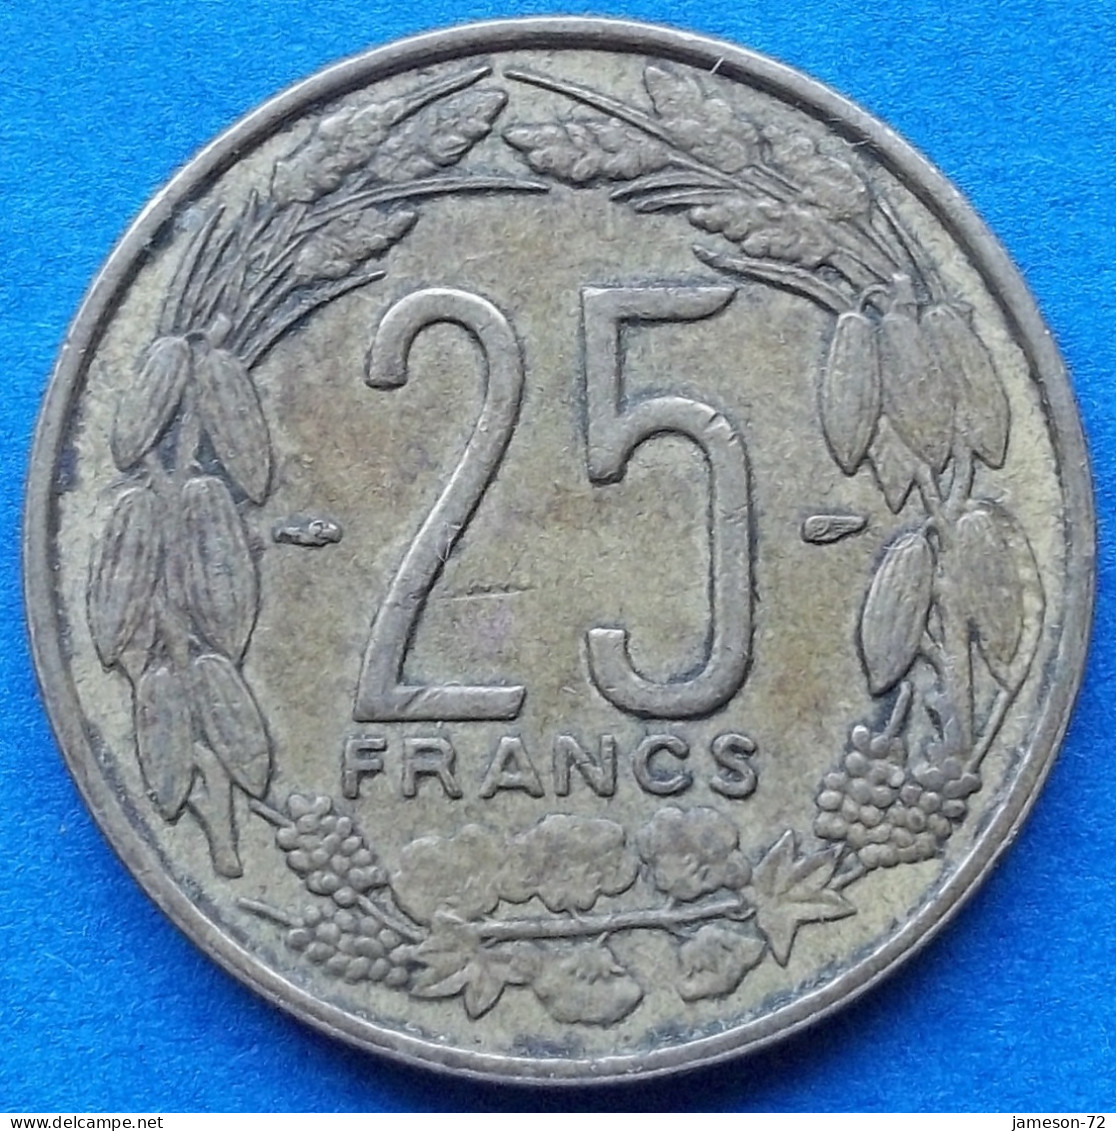 CAMEROON - 25 Francs 1958 "Three Giant Eland" KM# 12 French Equatorial Africa - Edelweiss Coins - Cameroon